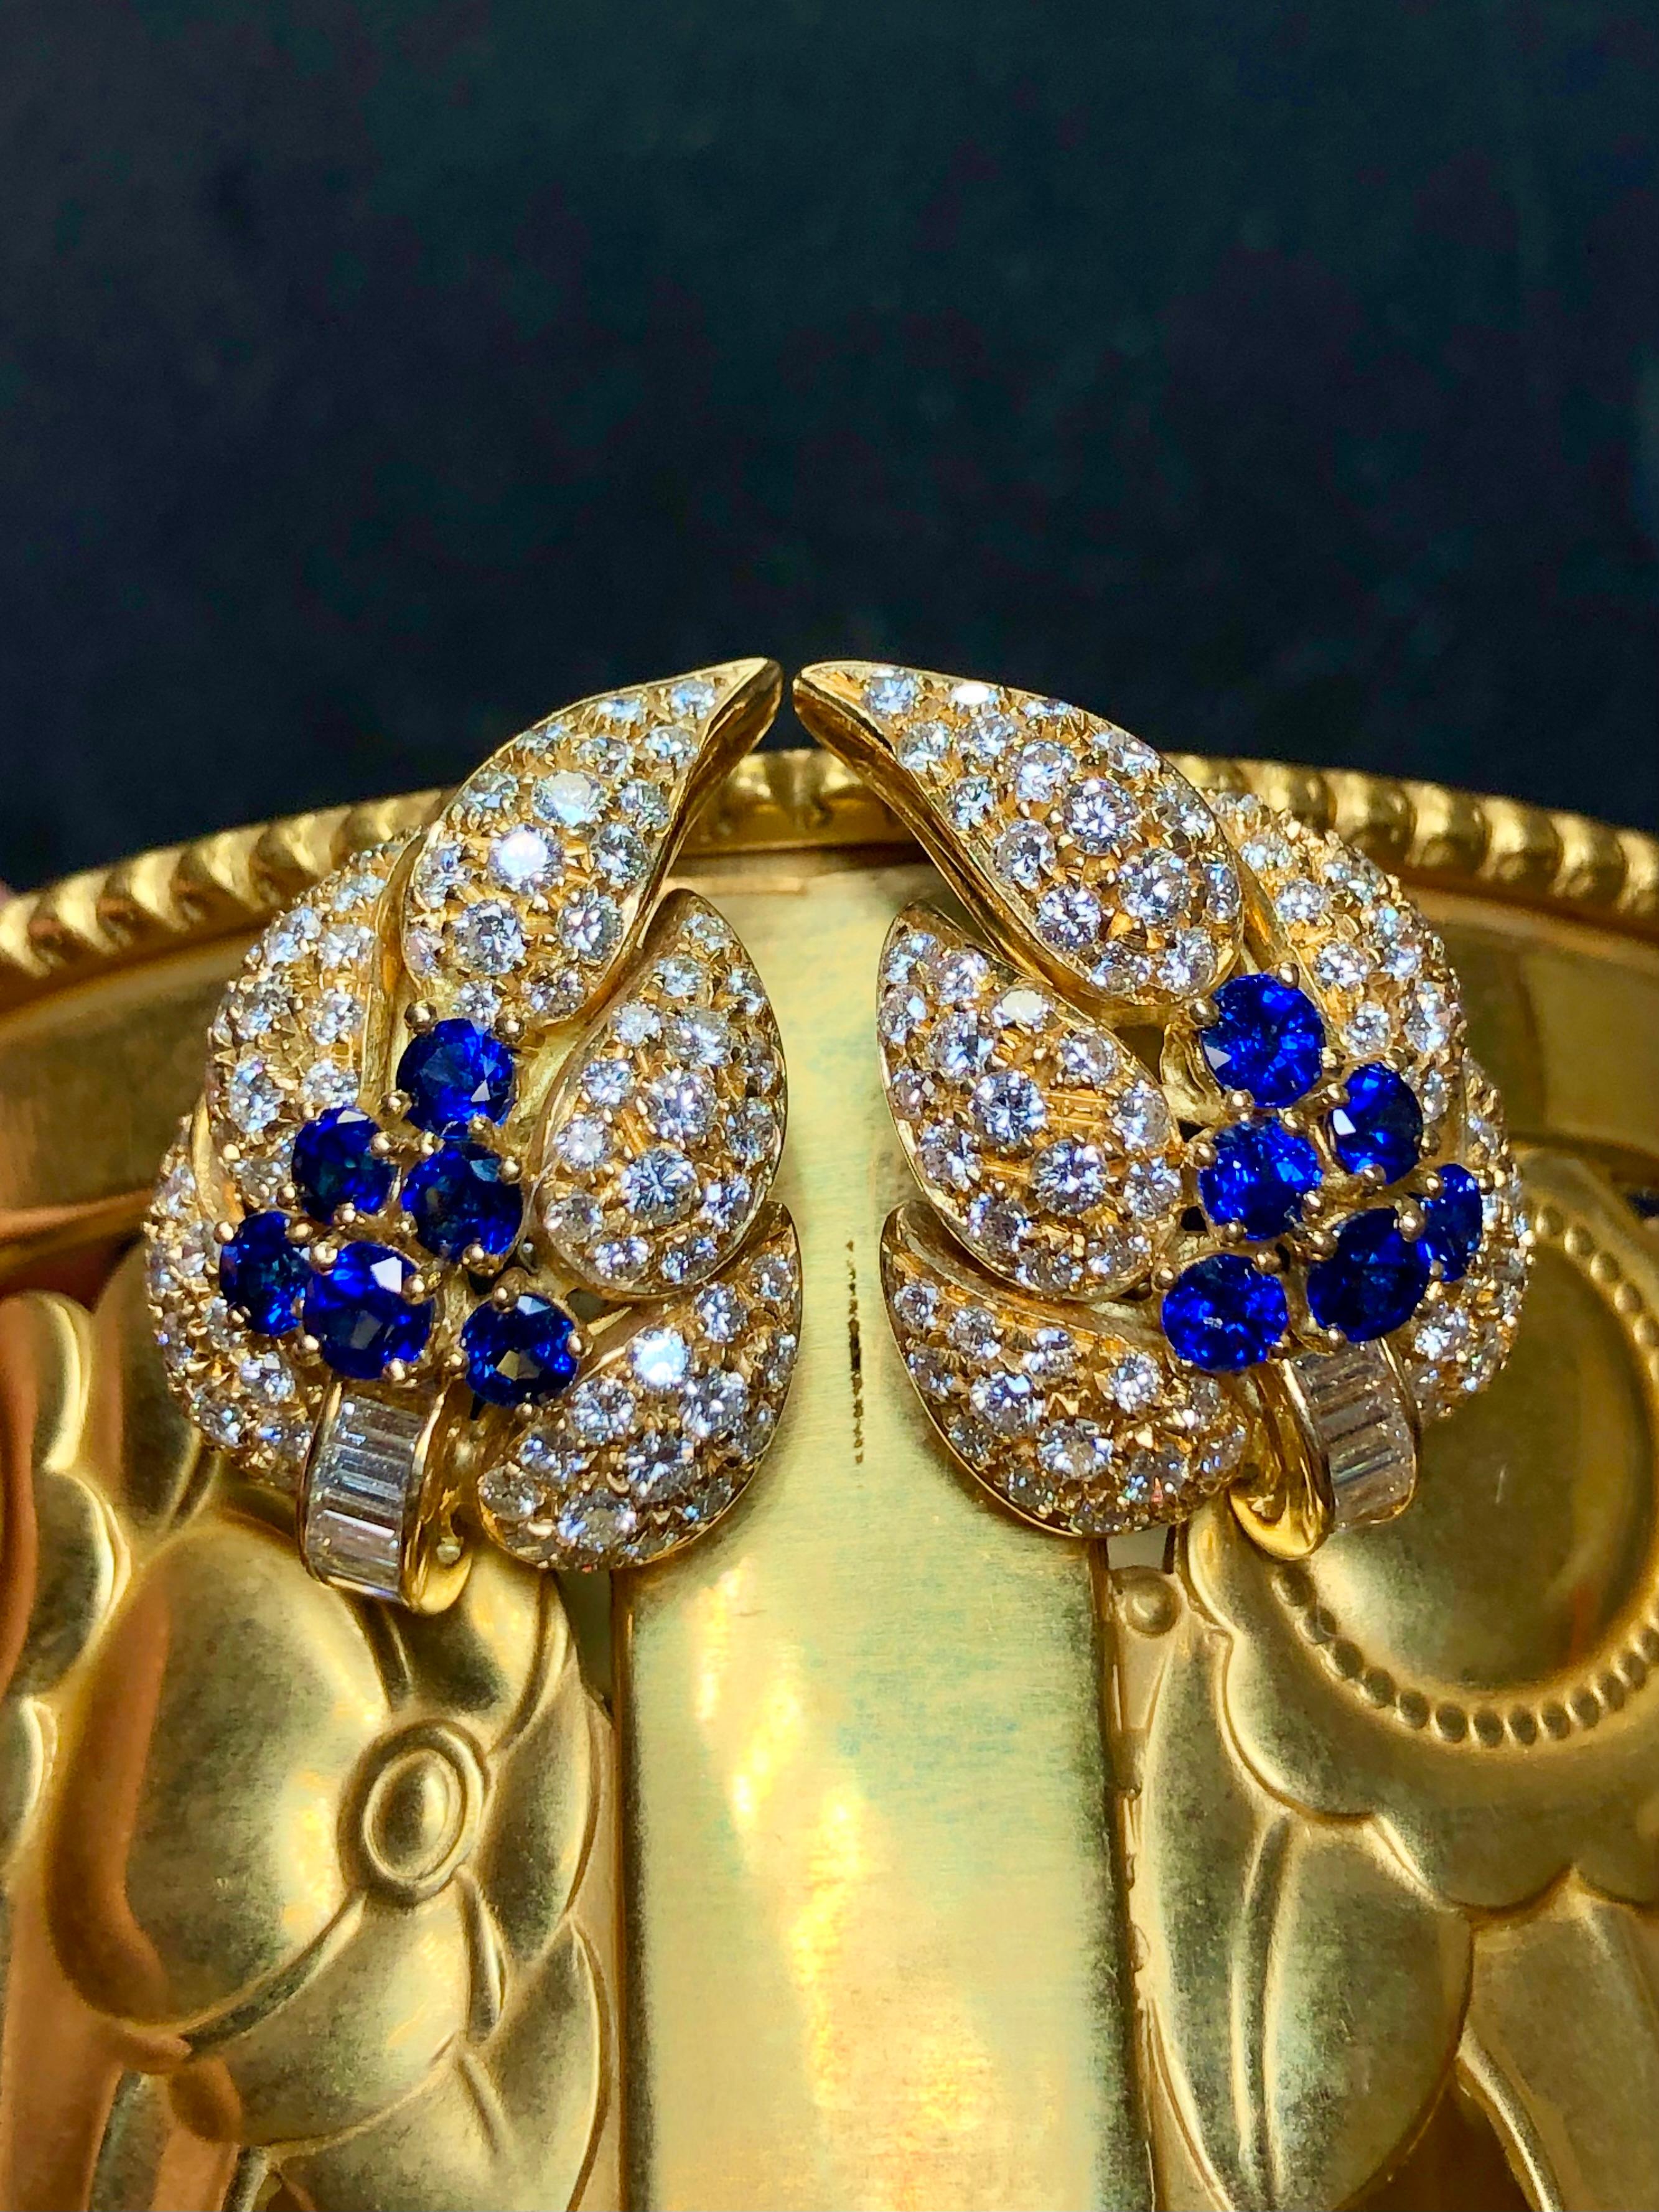 The pictures speak for the themselves but wow! These earrings are hand crafted in 18K yellow gold and set with approximately 1.80cttw in bright royal blue sapphires as well as 4.24cttw in F-G color Vs1-2 clarity round and baguette diamonds. Earrings